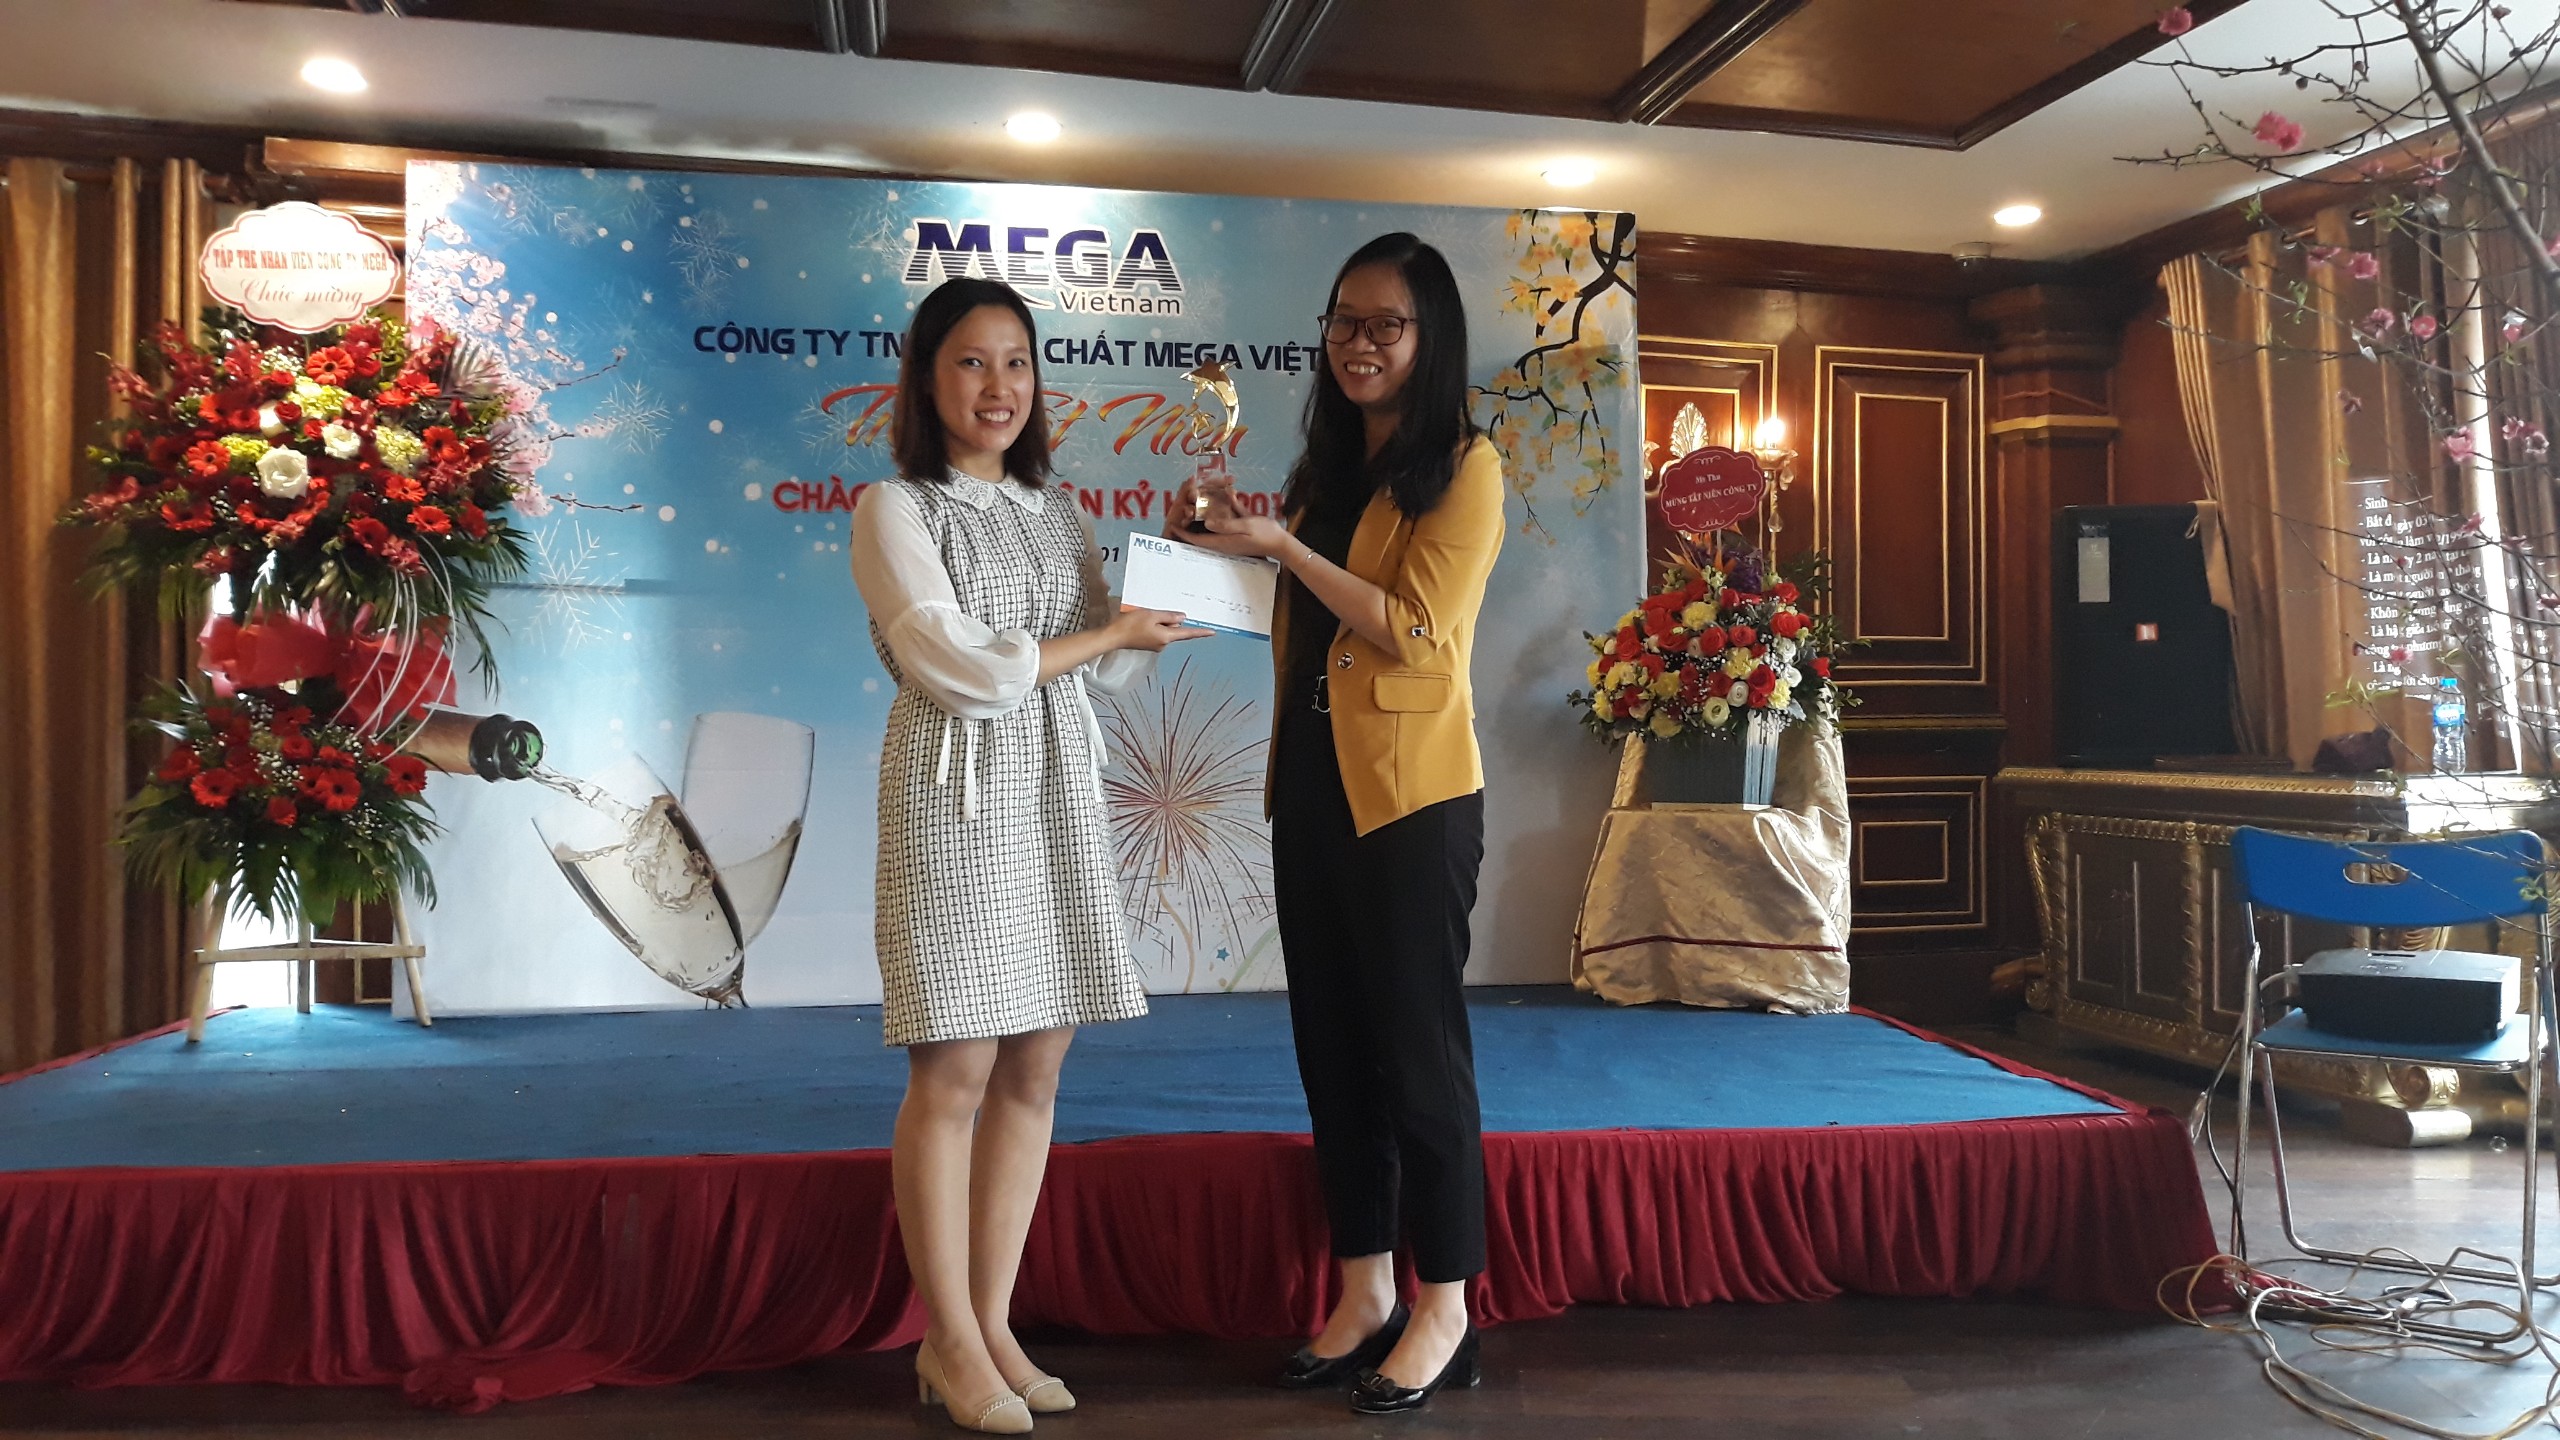 Ms. Nguyen Thi Cong - The Best Office Staff Award